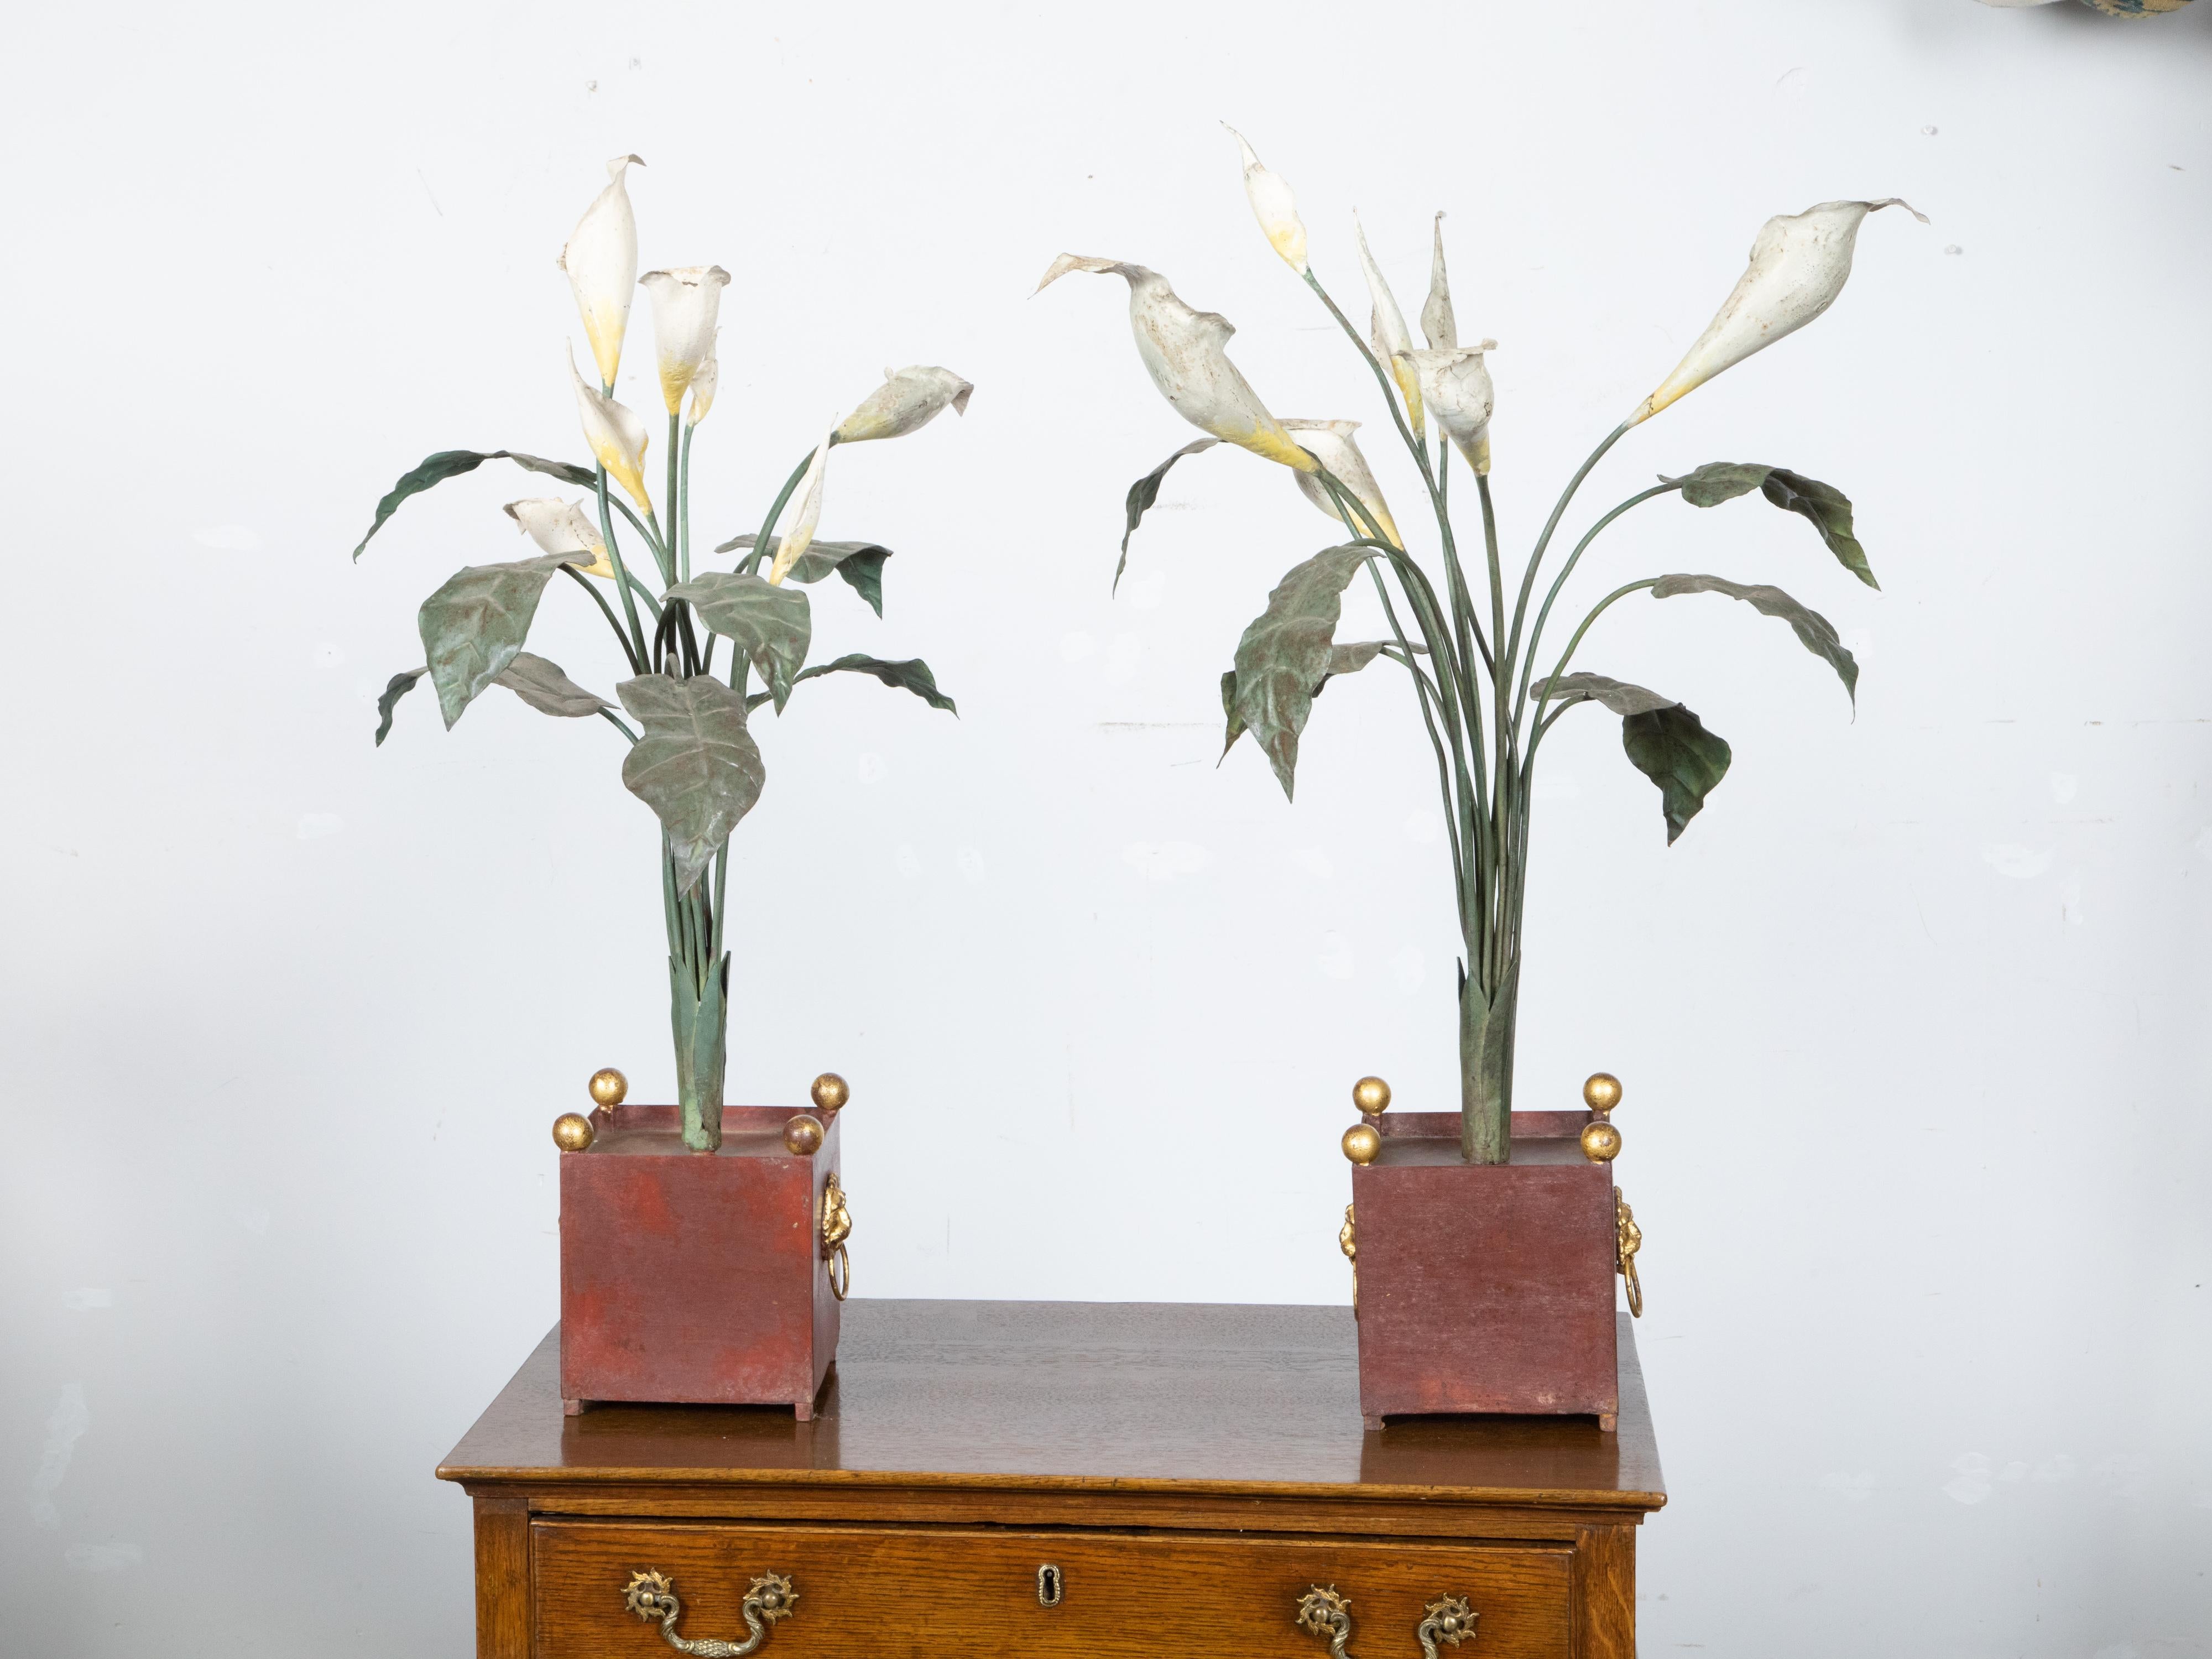 A pair of Italian vintage painted tôle Calla Lilies sculptures from the early 20th century, with white, yellow and green tones, in red containers. Created in Italy during the second quarter of the 20th century, each of this pair of sculptures is